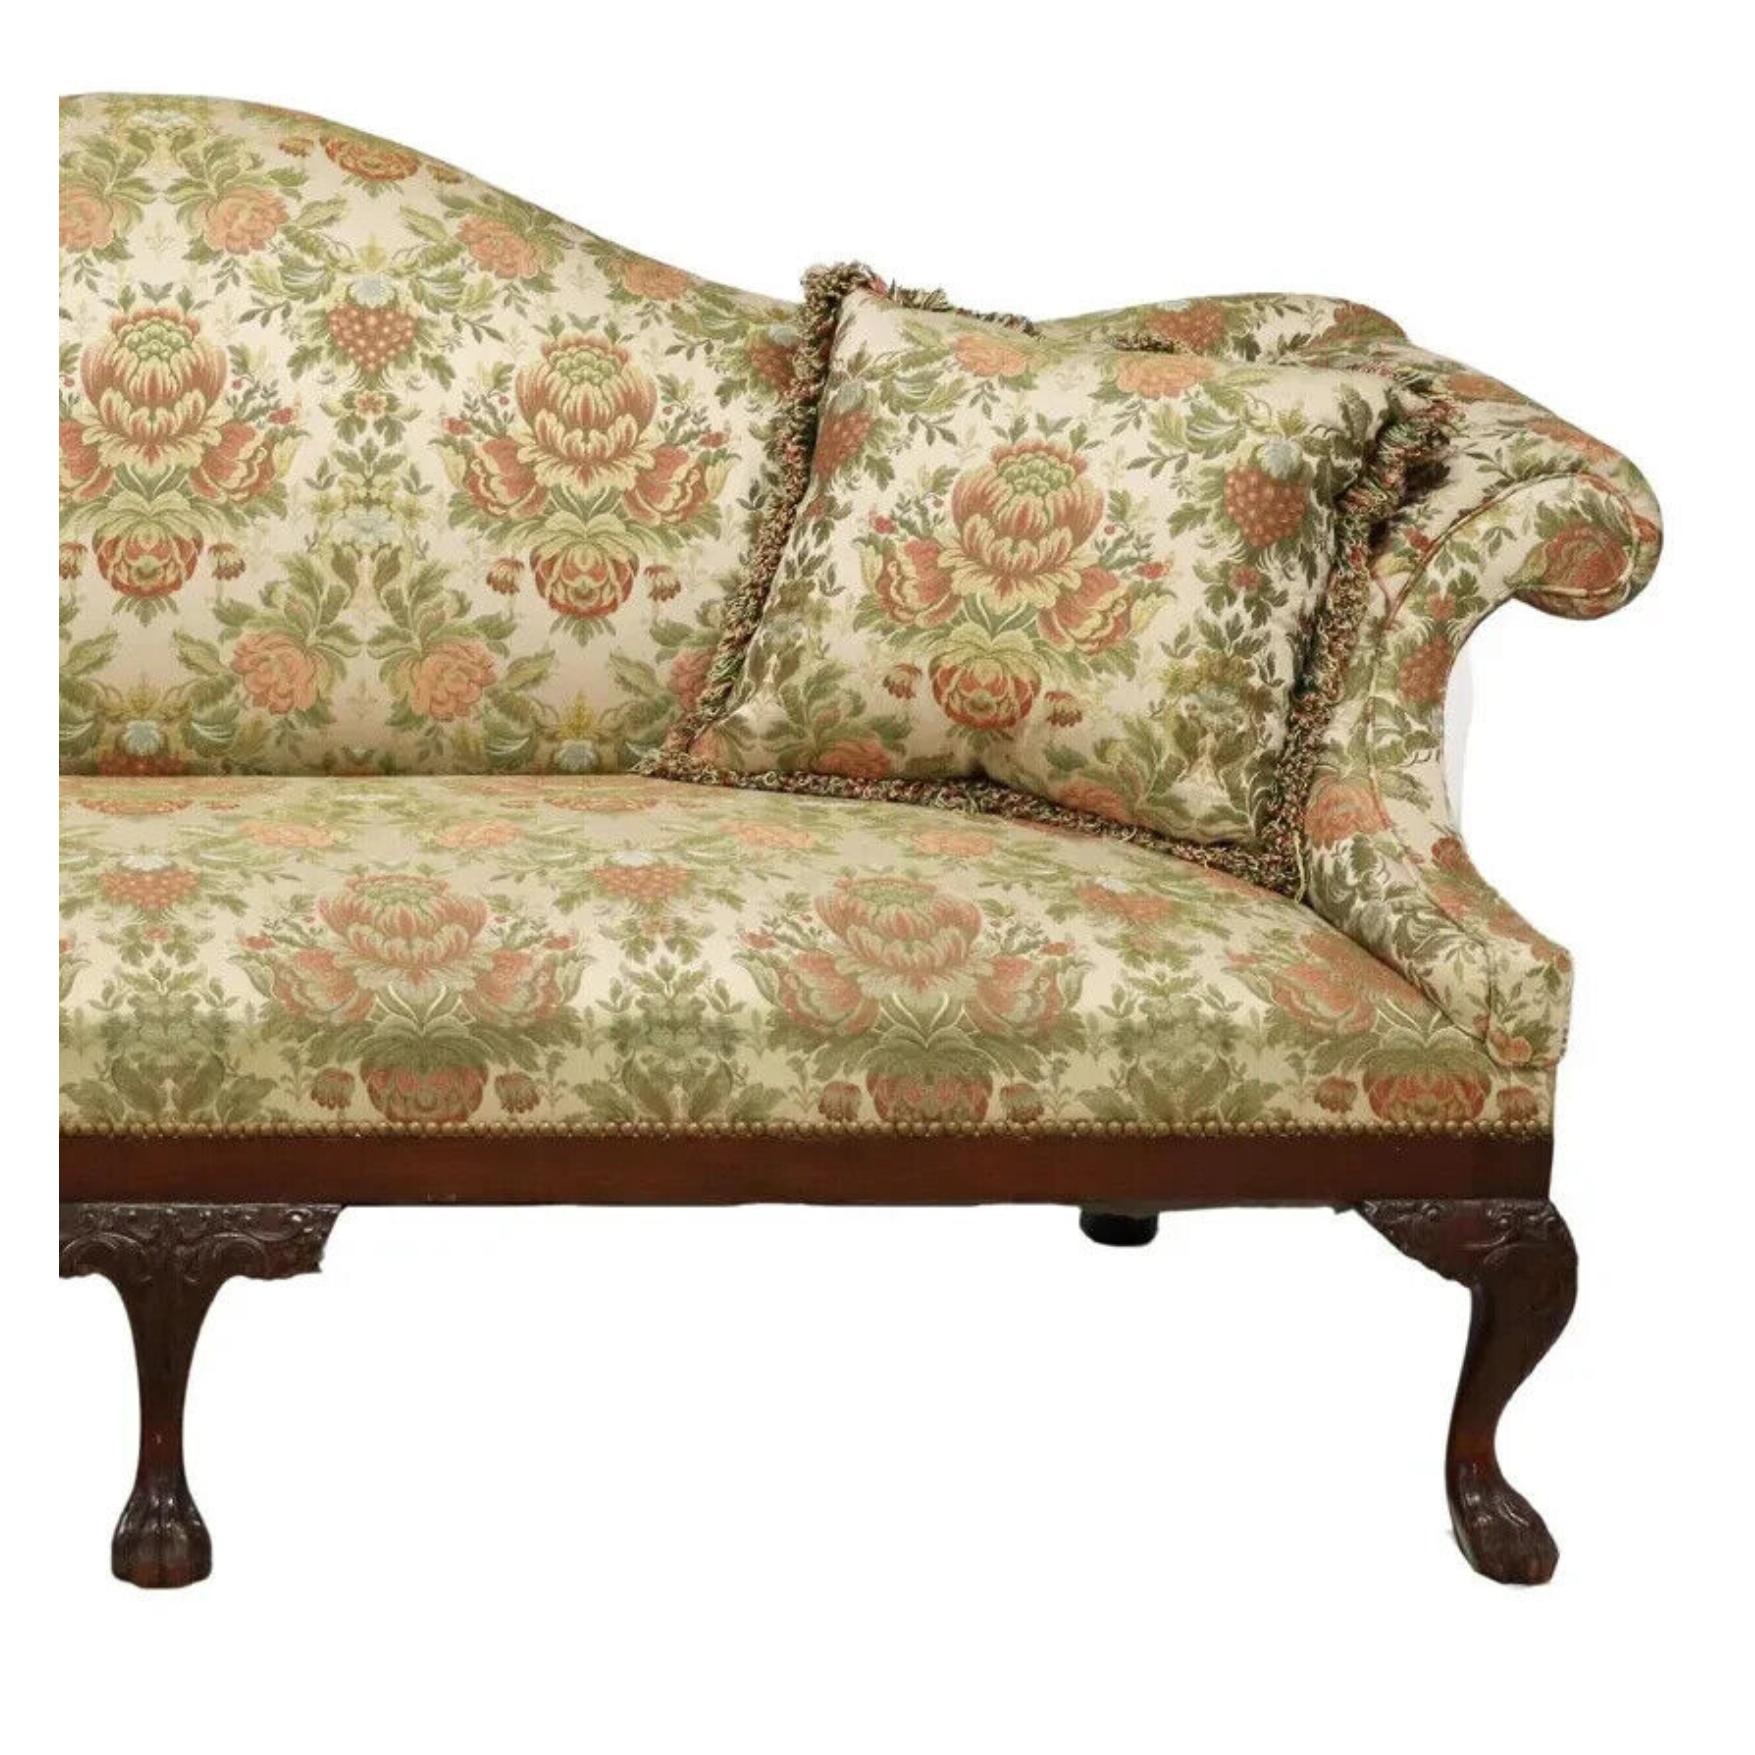 Carved George II Style, Mahogany, Camelback, Floral Pattern, Vintage / Antique Sofa